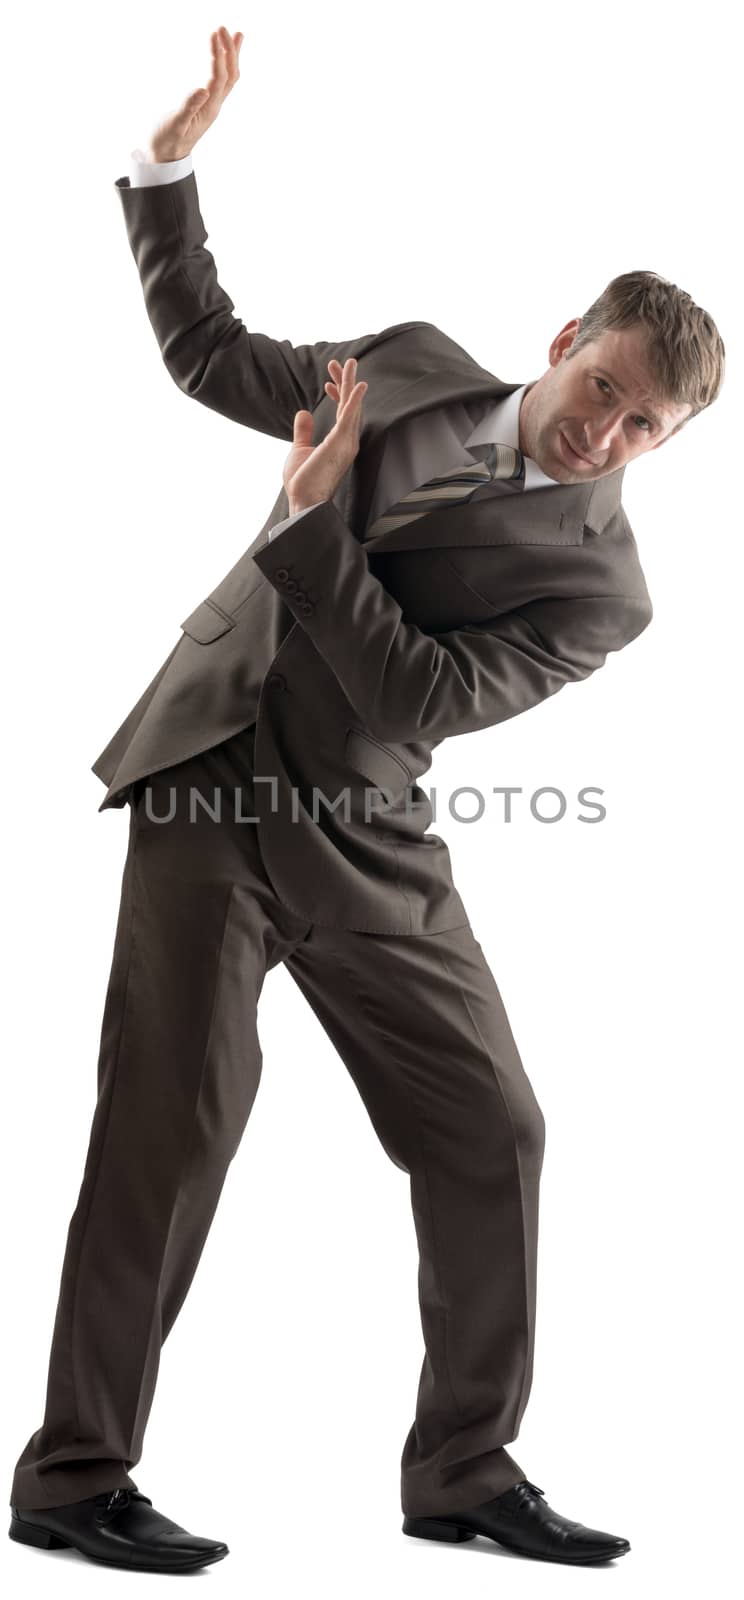 Man defending himself isolated on white background